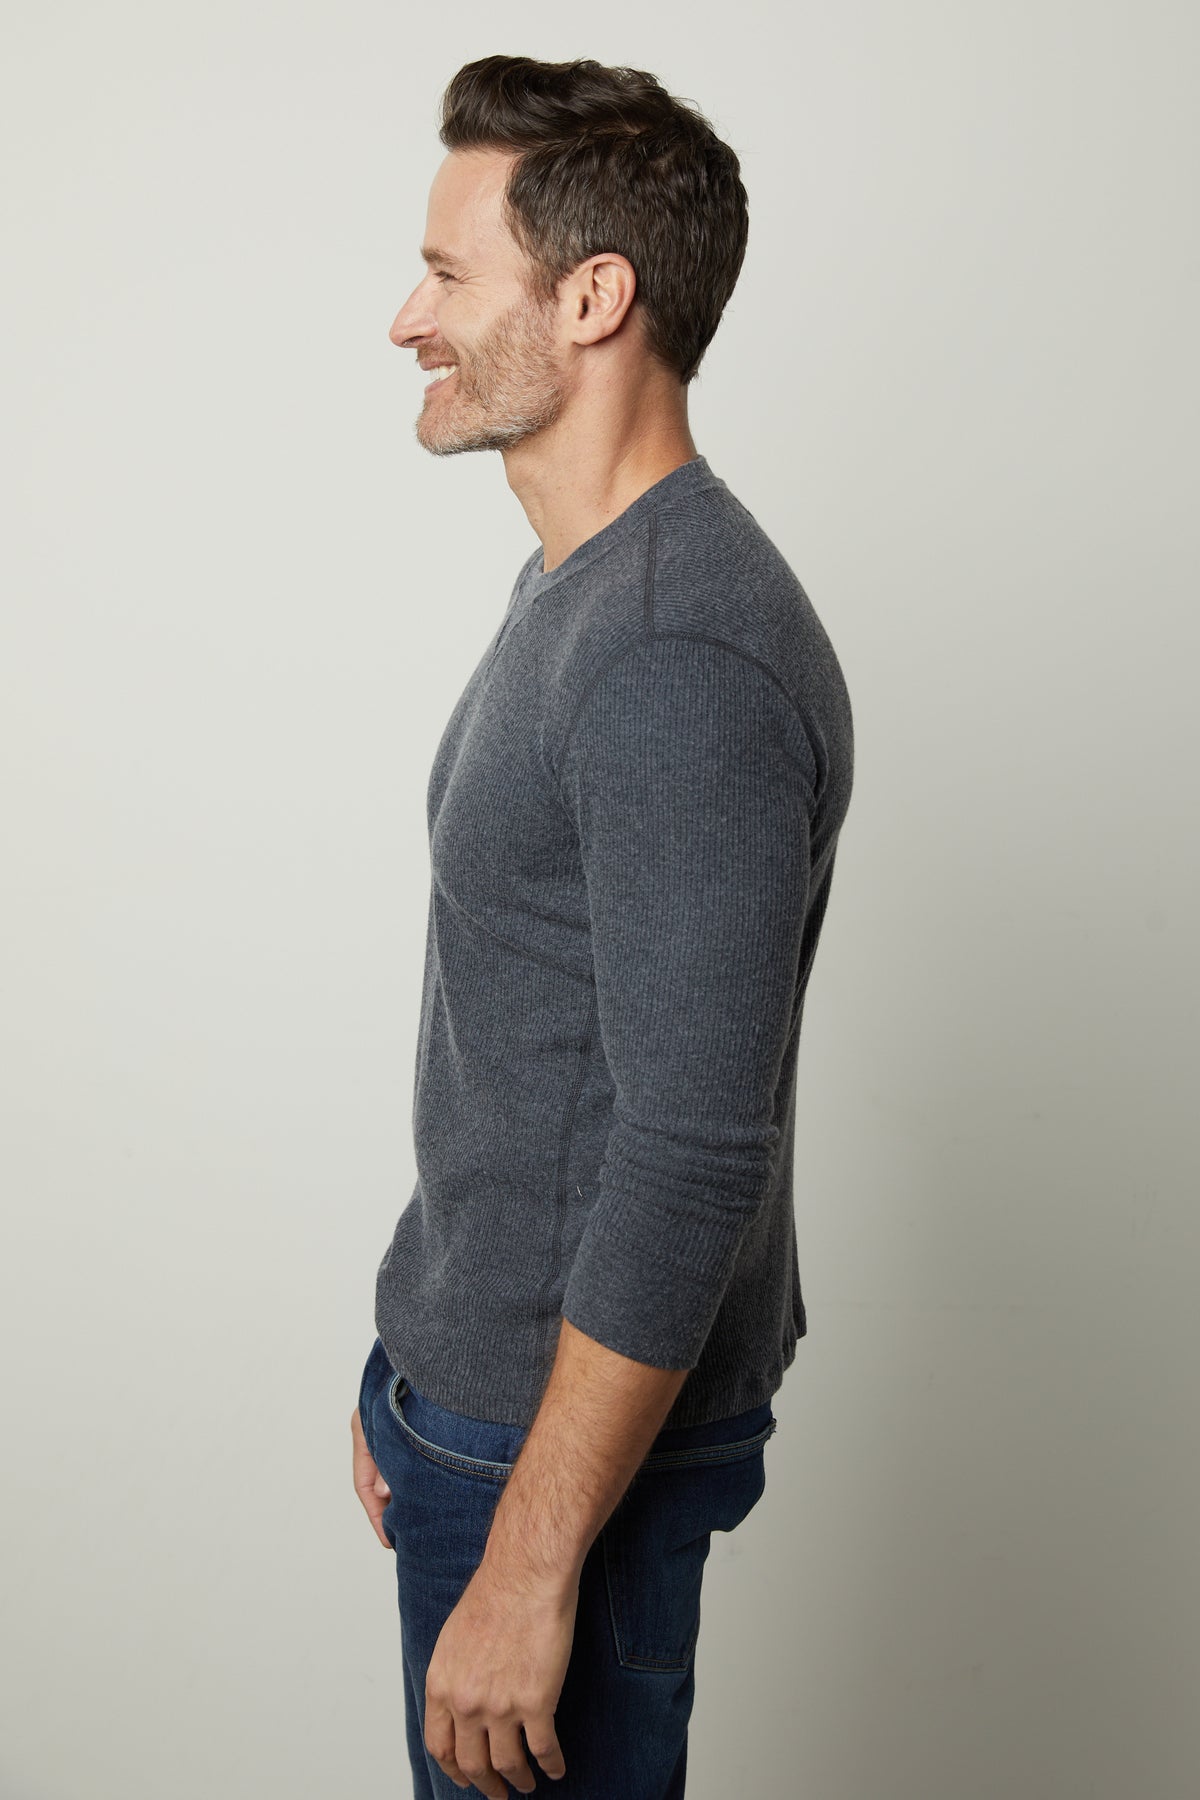 A man wearing jeans and a grey Velvet by Graham & Spencer AUGUSTUS RIB KNIT CREW sweater.-26905806700737